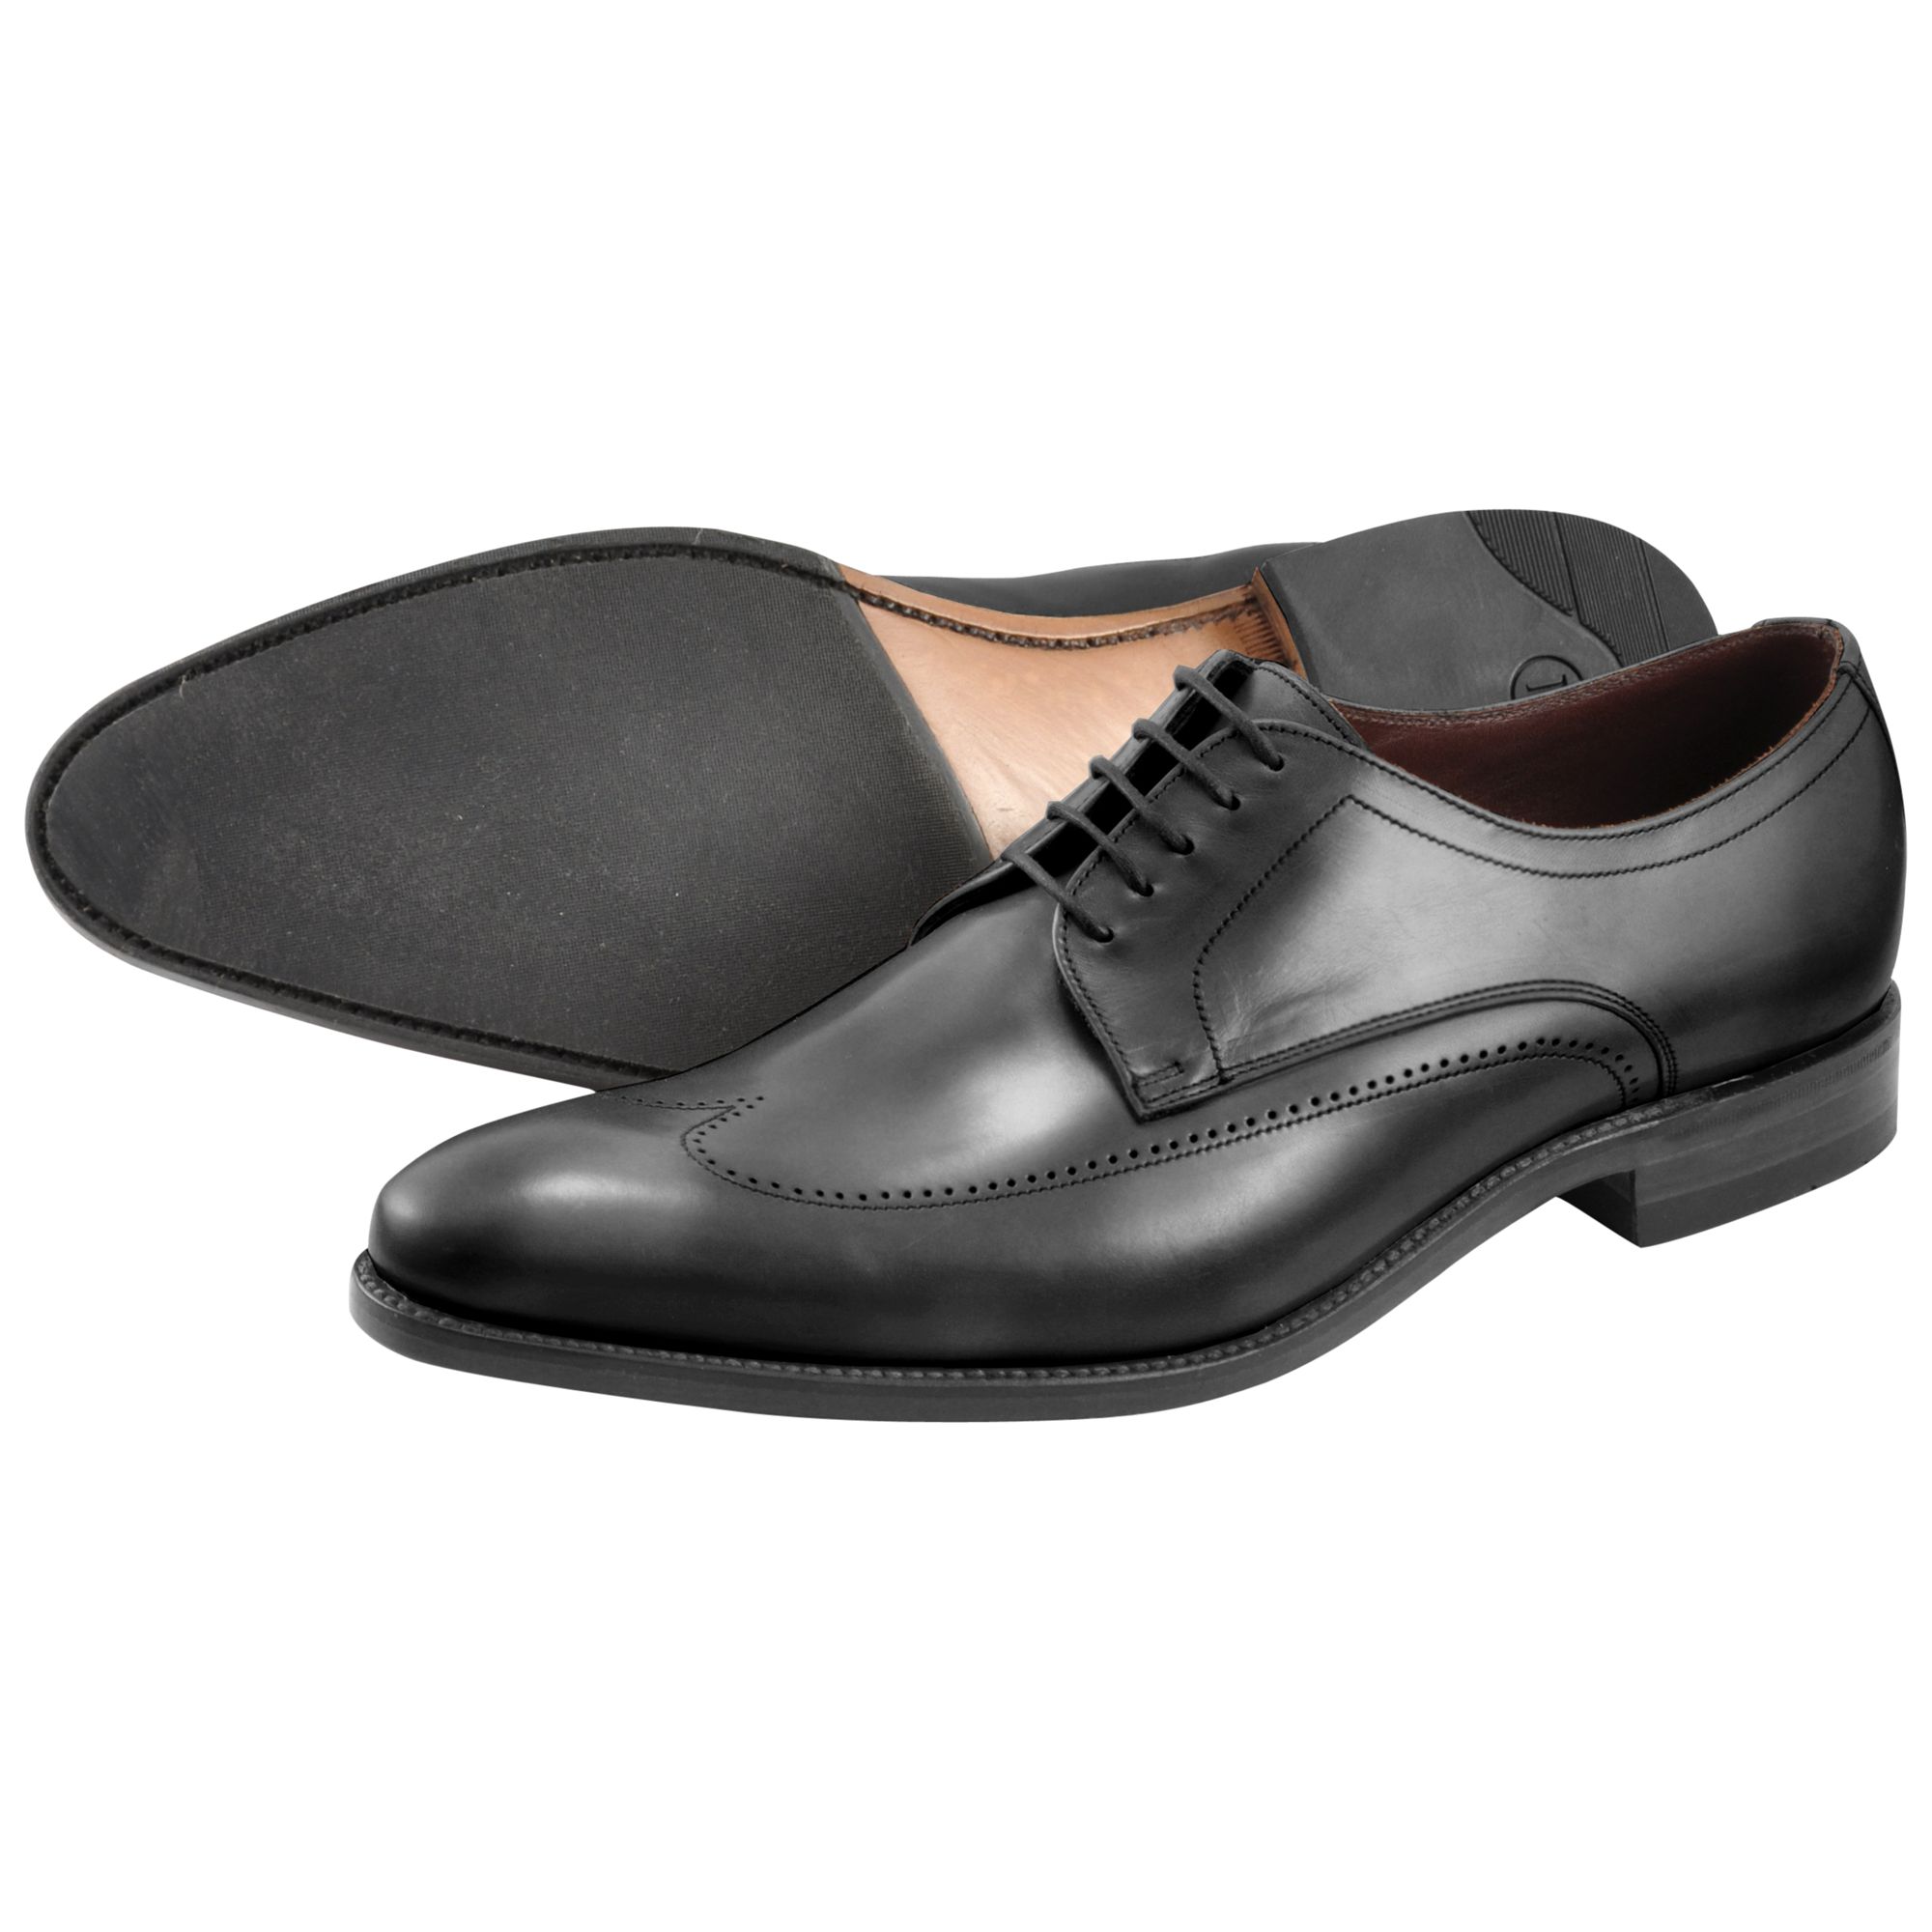 Loake Victor Leather Derby Shoes, Black at John Lewis & Partners